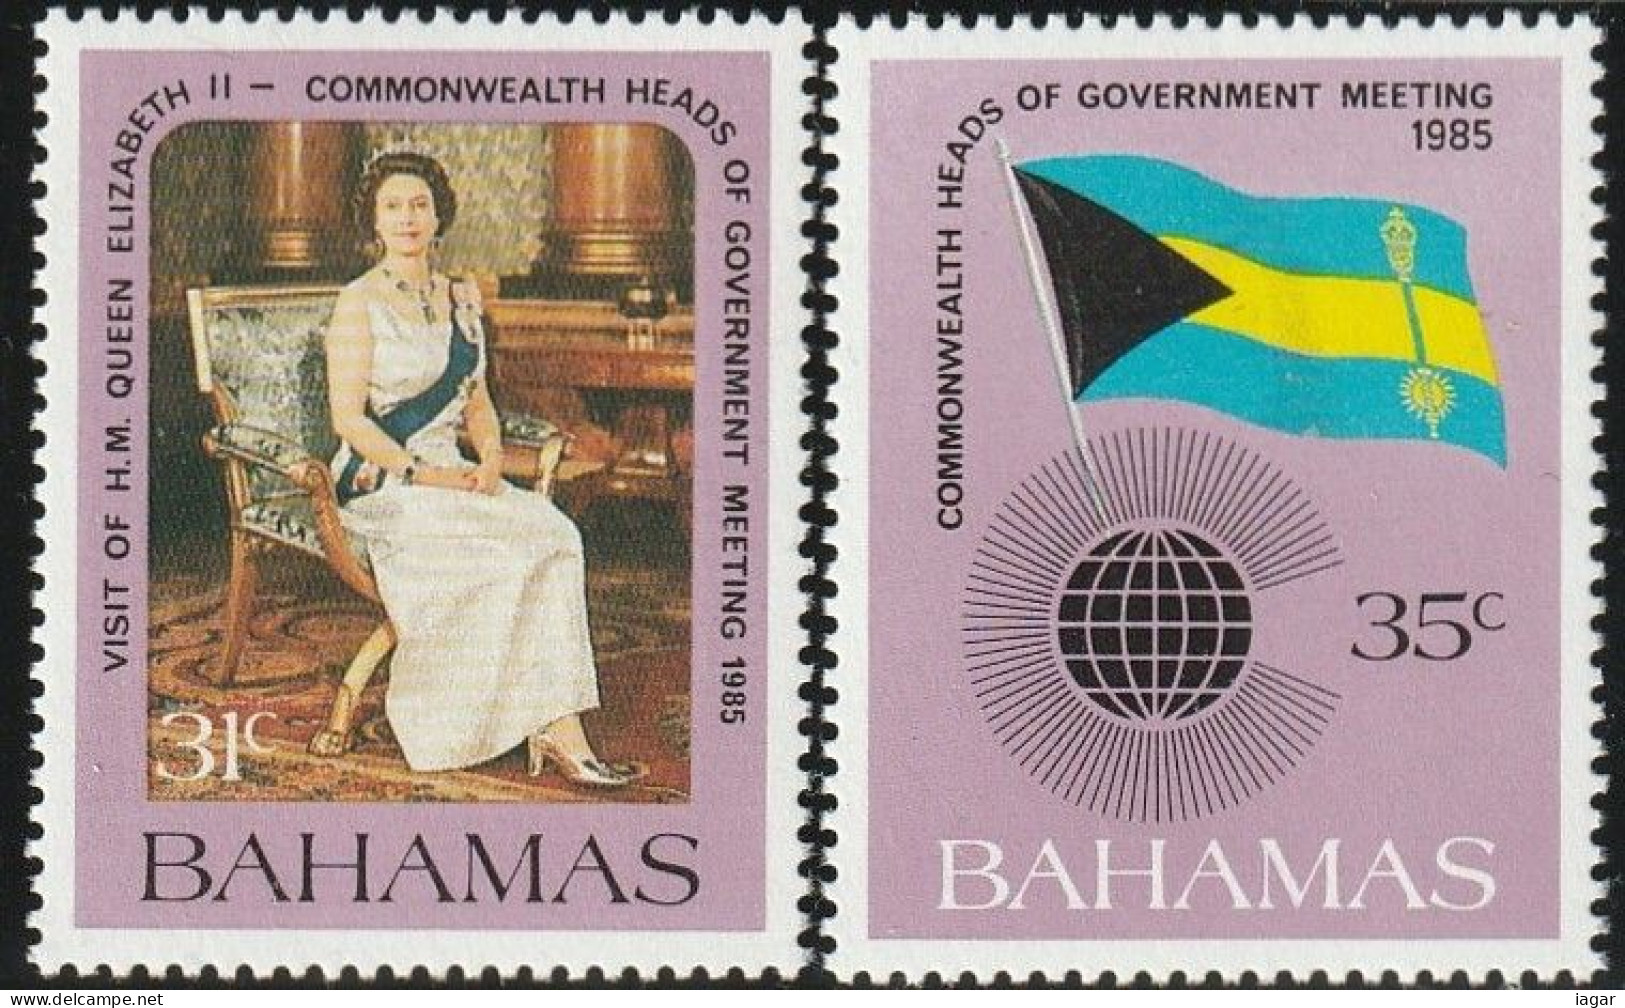 THEMATIC FLAG:  COMM. HEADS OF GOVERNMENT MEETING. QUEEN EII, FLAG OF THE BAHAMAS, COMMONWEALTH EMBLEM    -  BAHAMAS - Francobolli